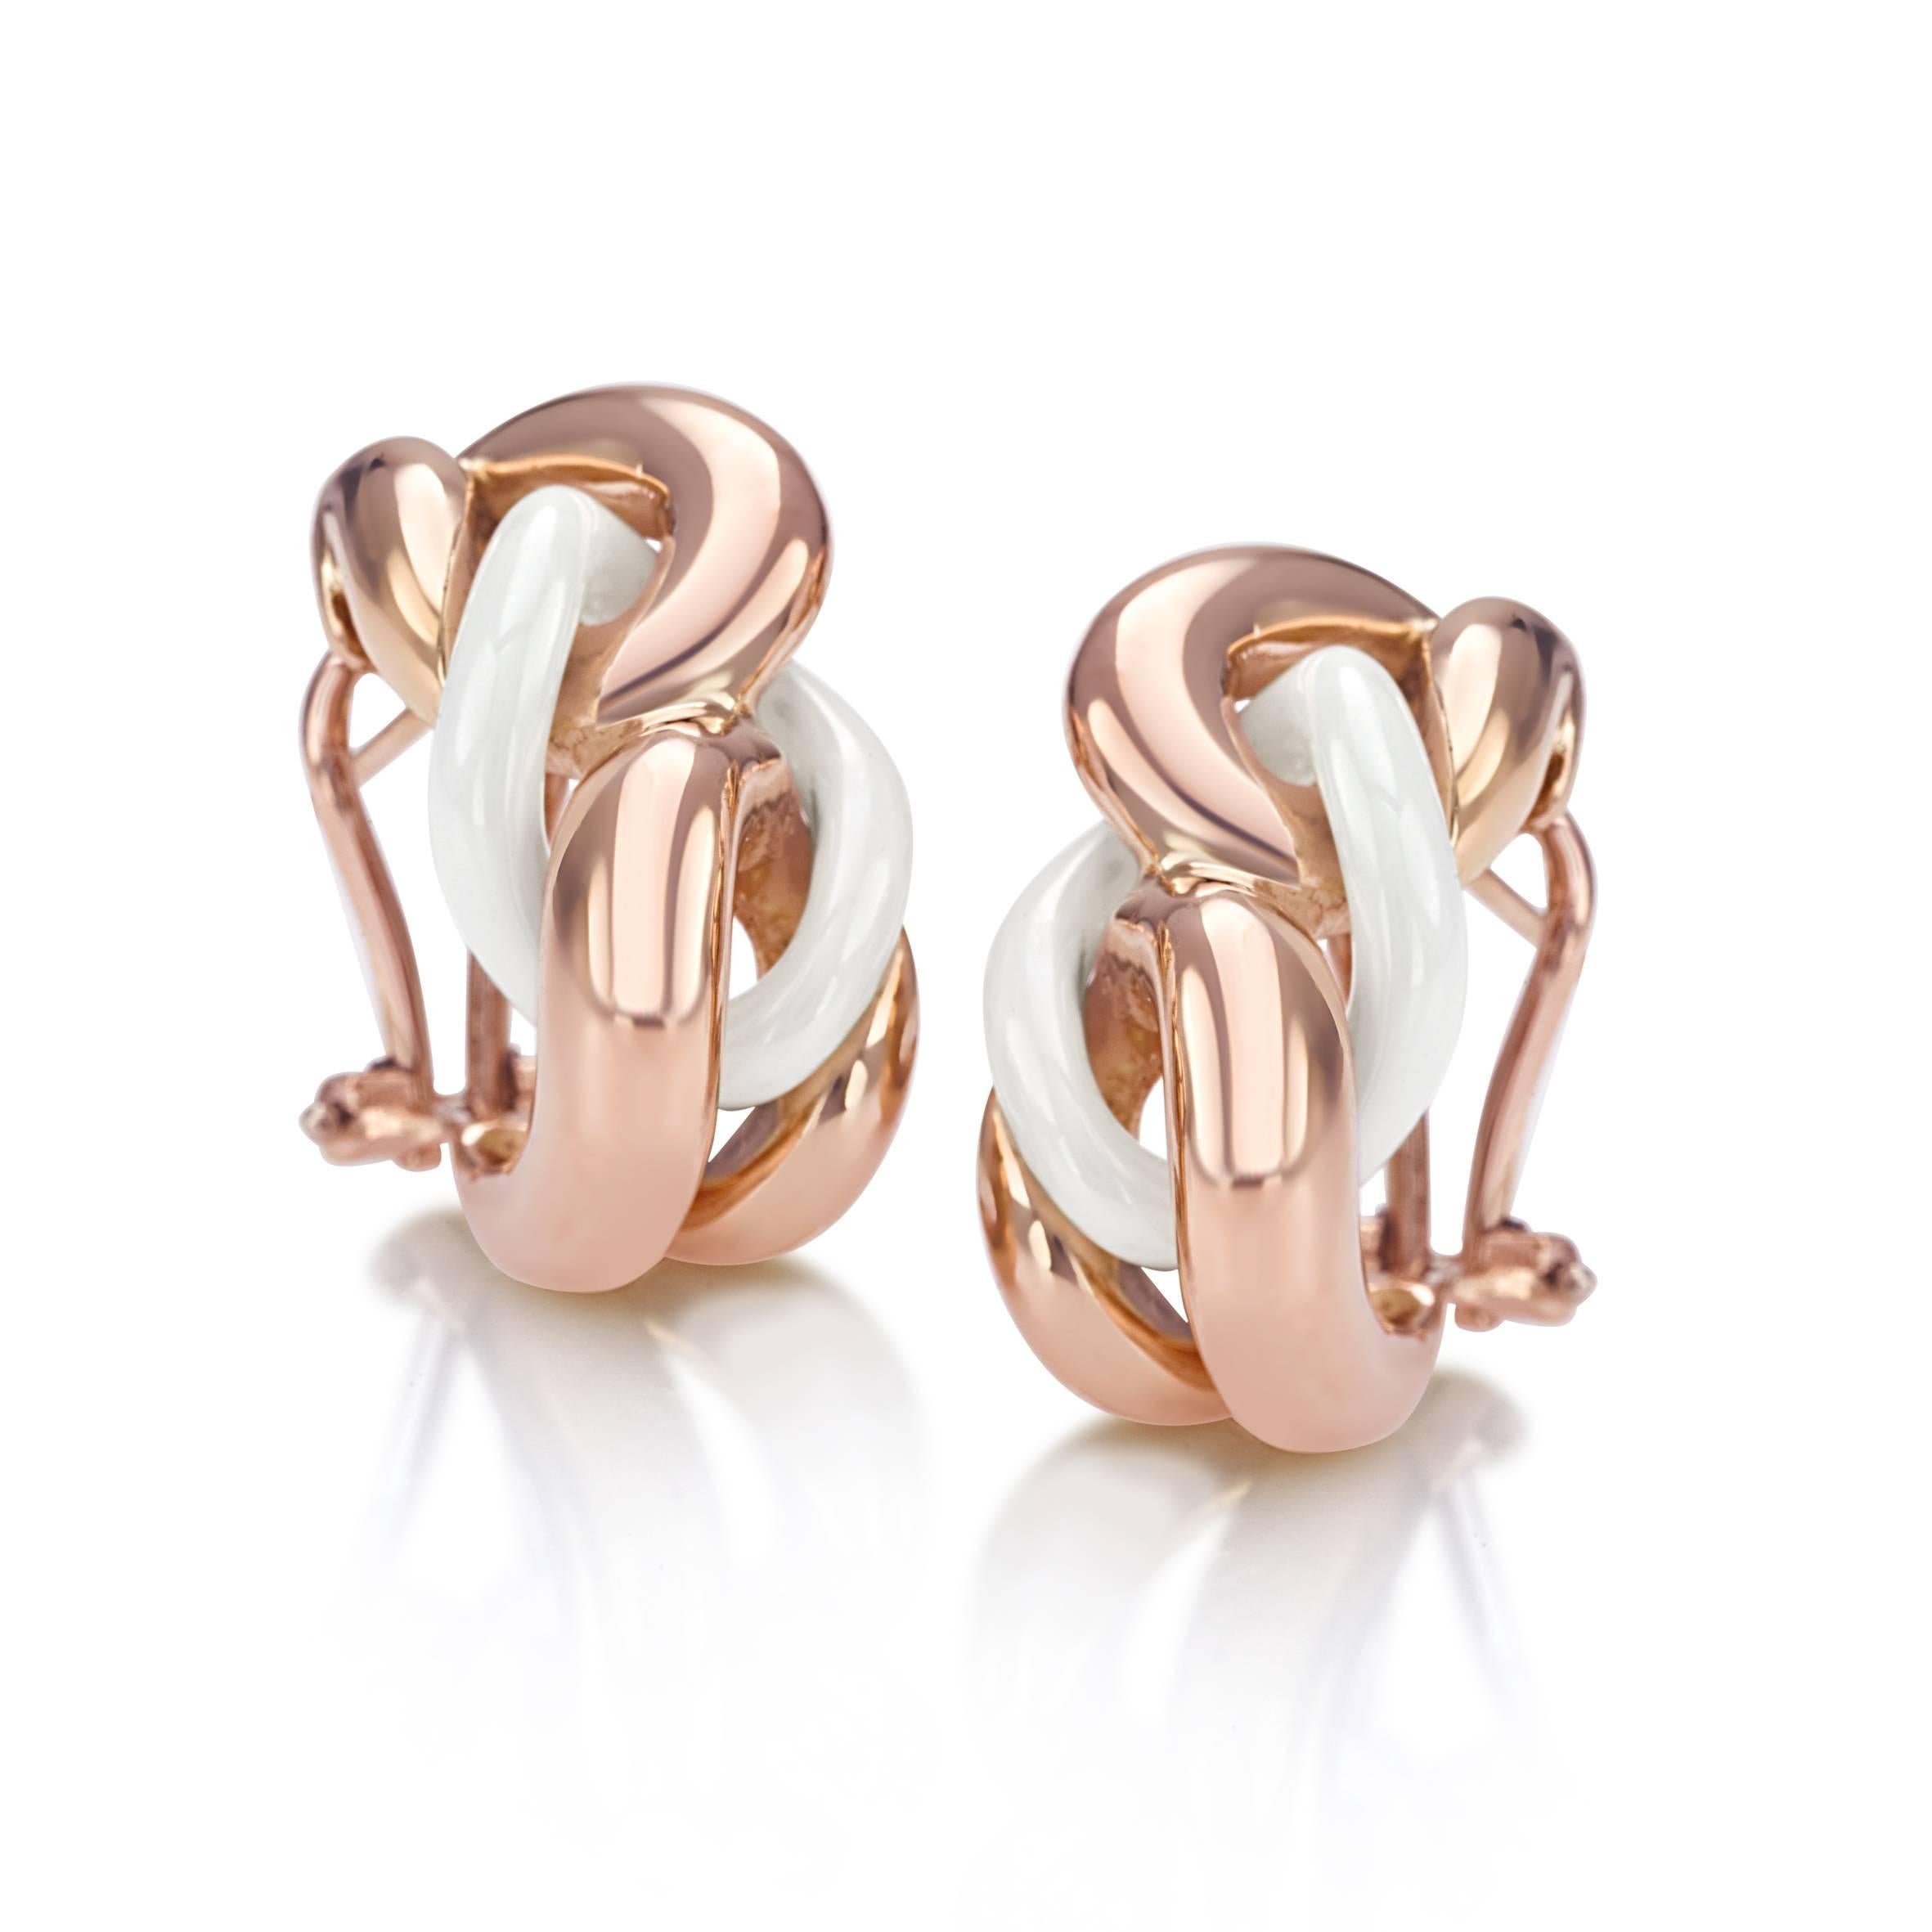 White ceramic groumette pair of earrings in 18 kt rose gold
The ceramic is a very resistant material. 
This iconic collection in Micheletto tradition was originally made only in gold just more or less 10 years ago it became very popular the ceramic